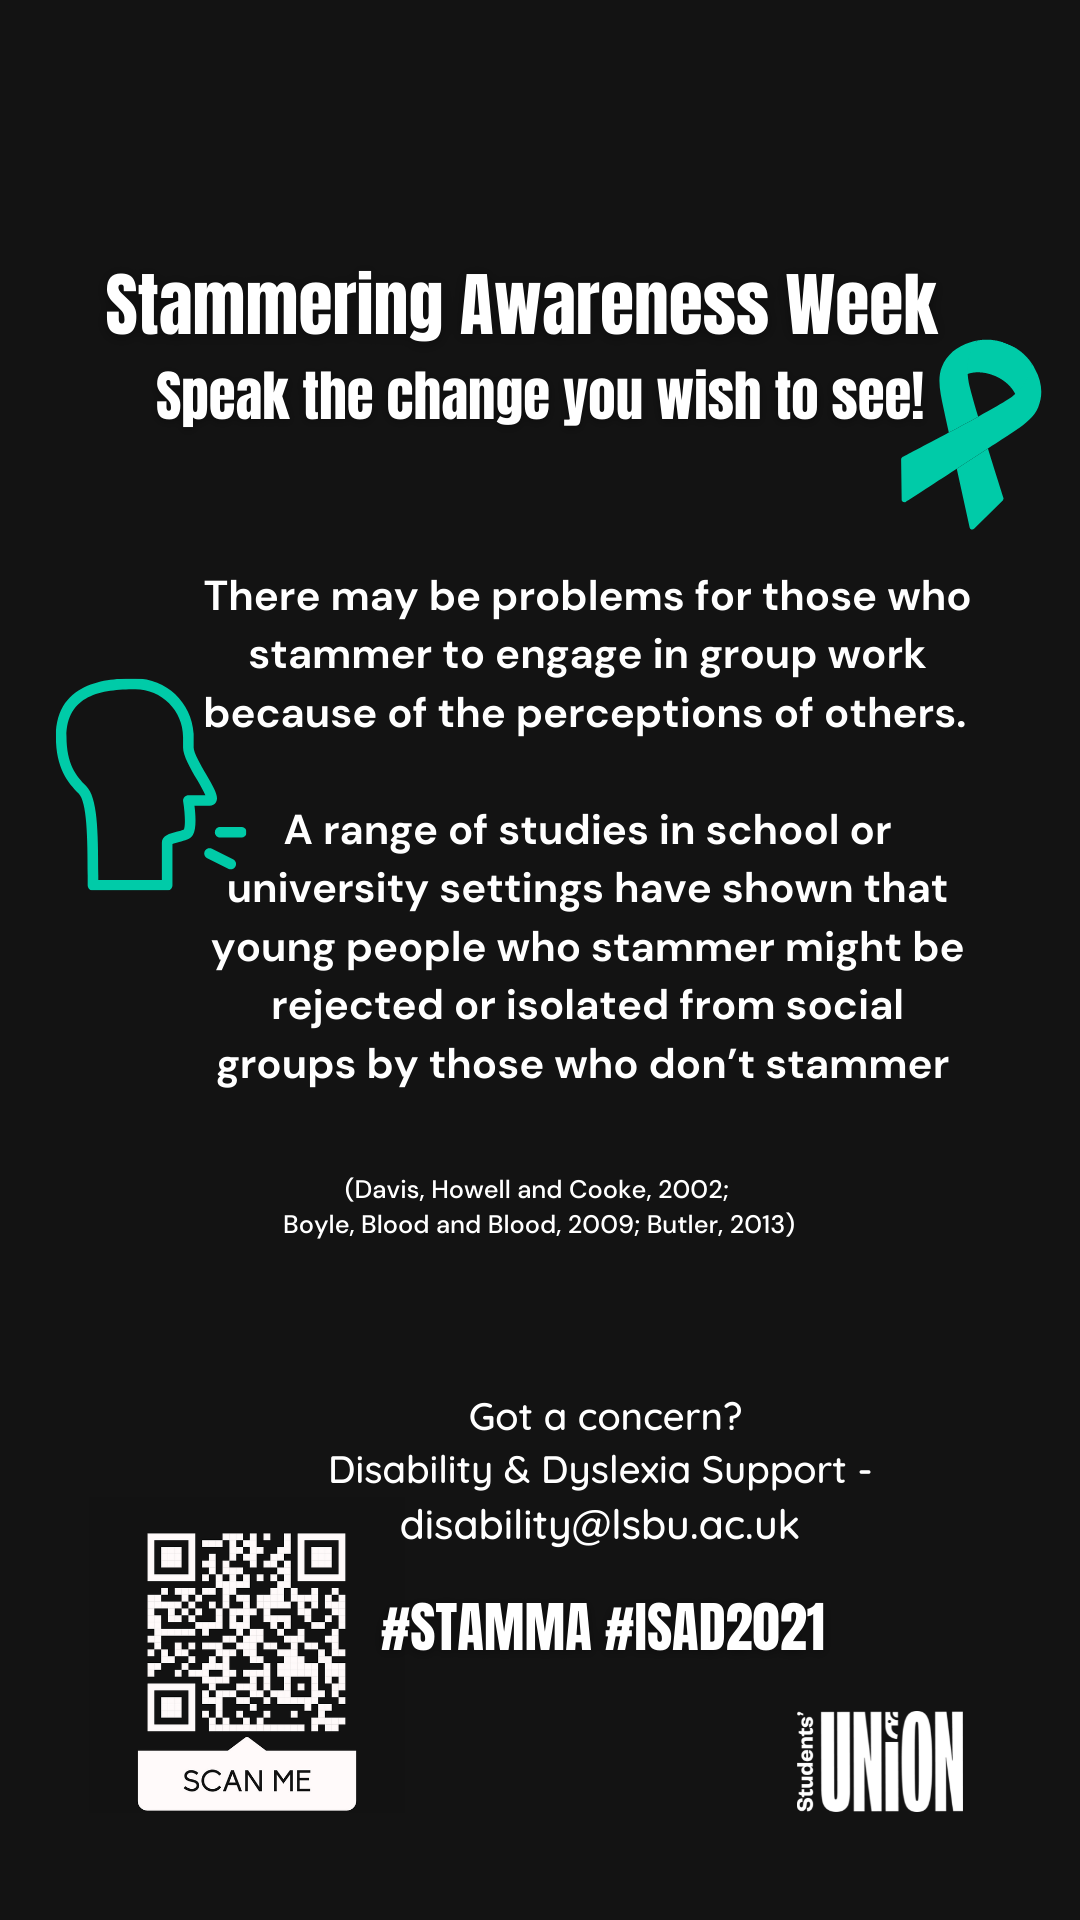 Statistic on Stammering poster: A range of studies in school or university settings have shown that young people who stammer might be rejected or isolated from social groups by those who don’t stammer 